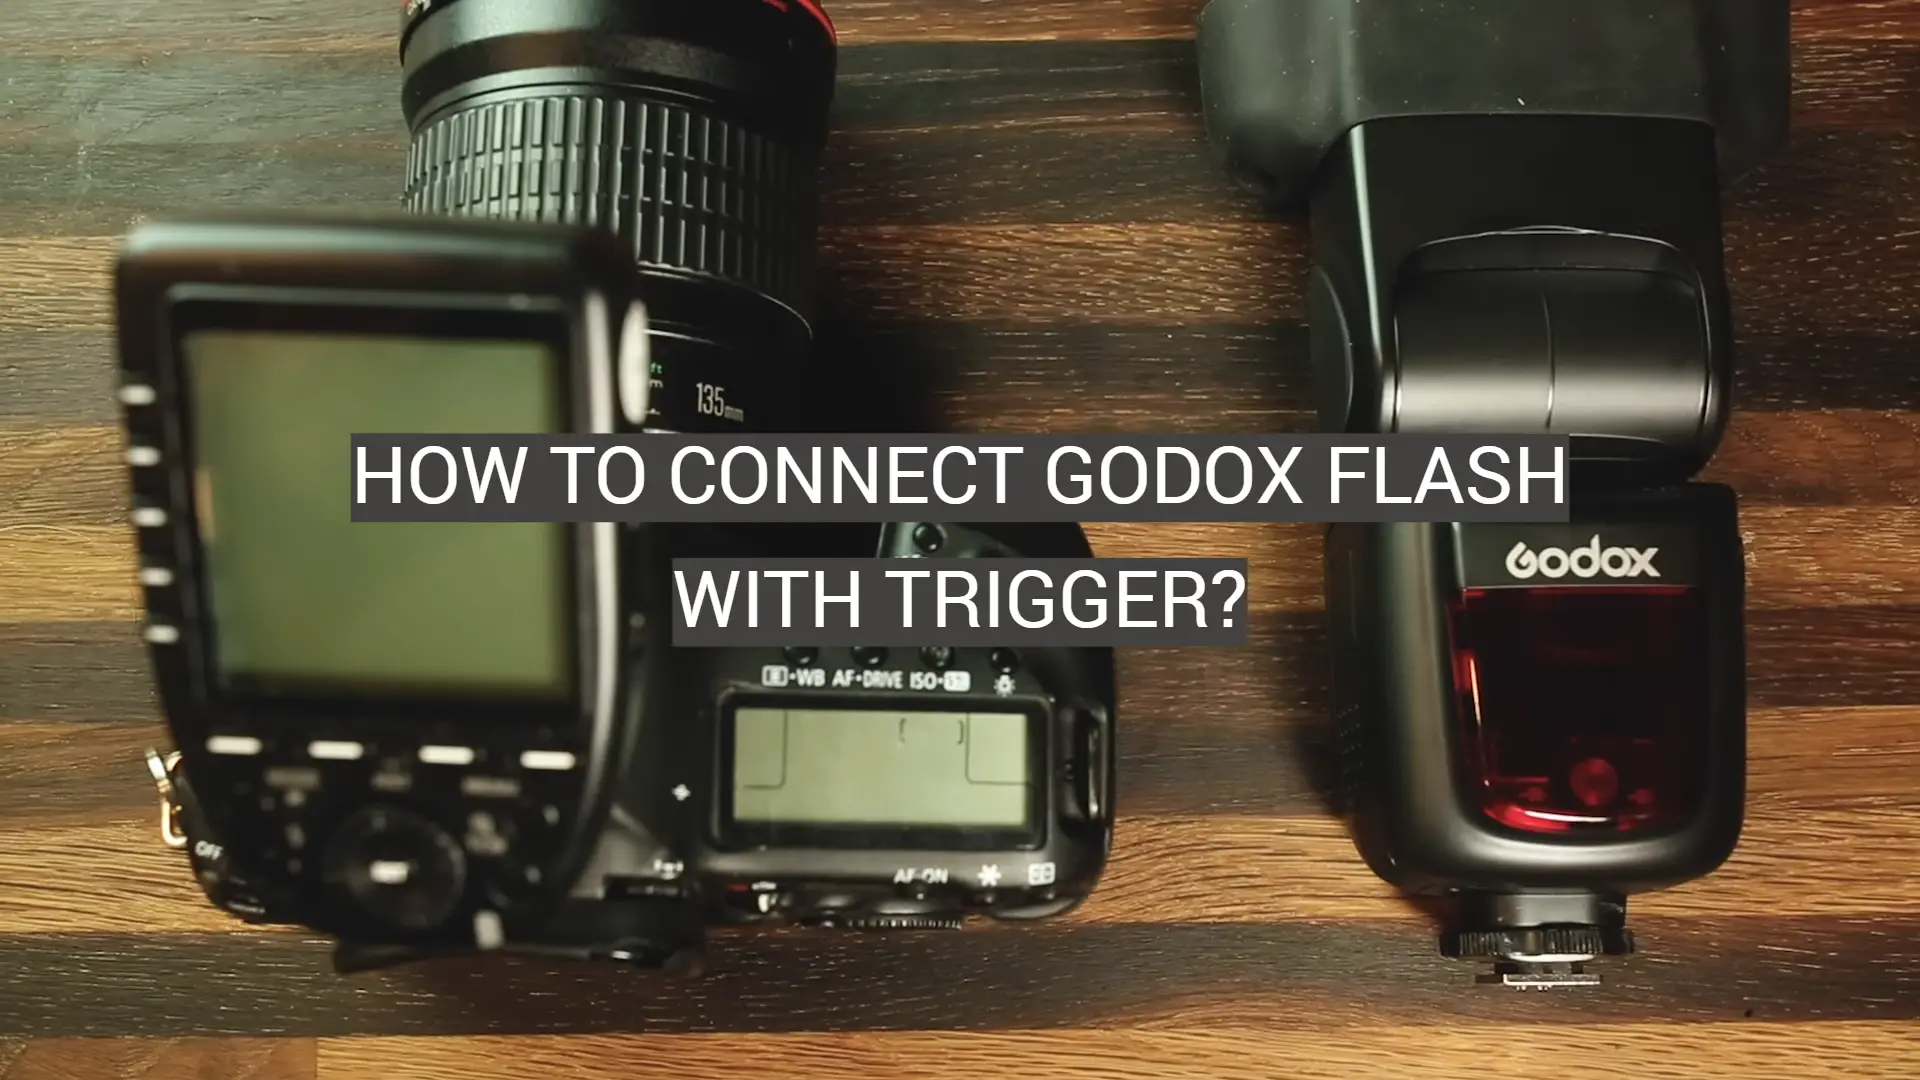 How to Connect Godox Flash With Trigger?